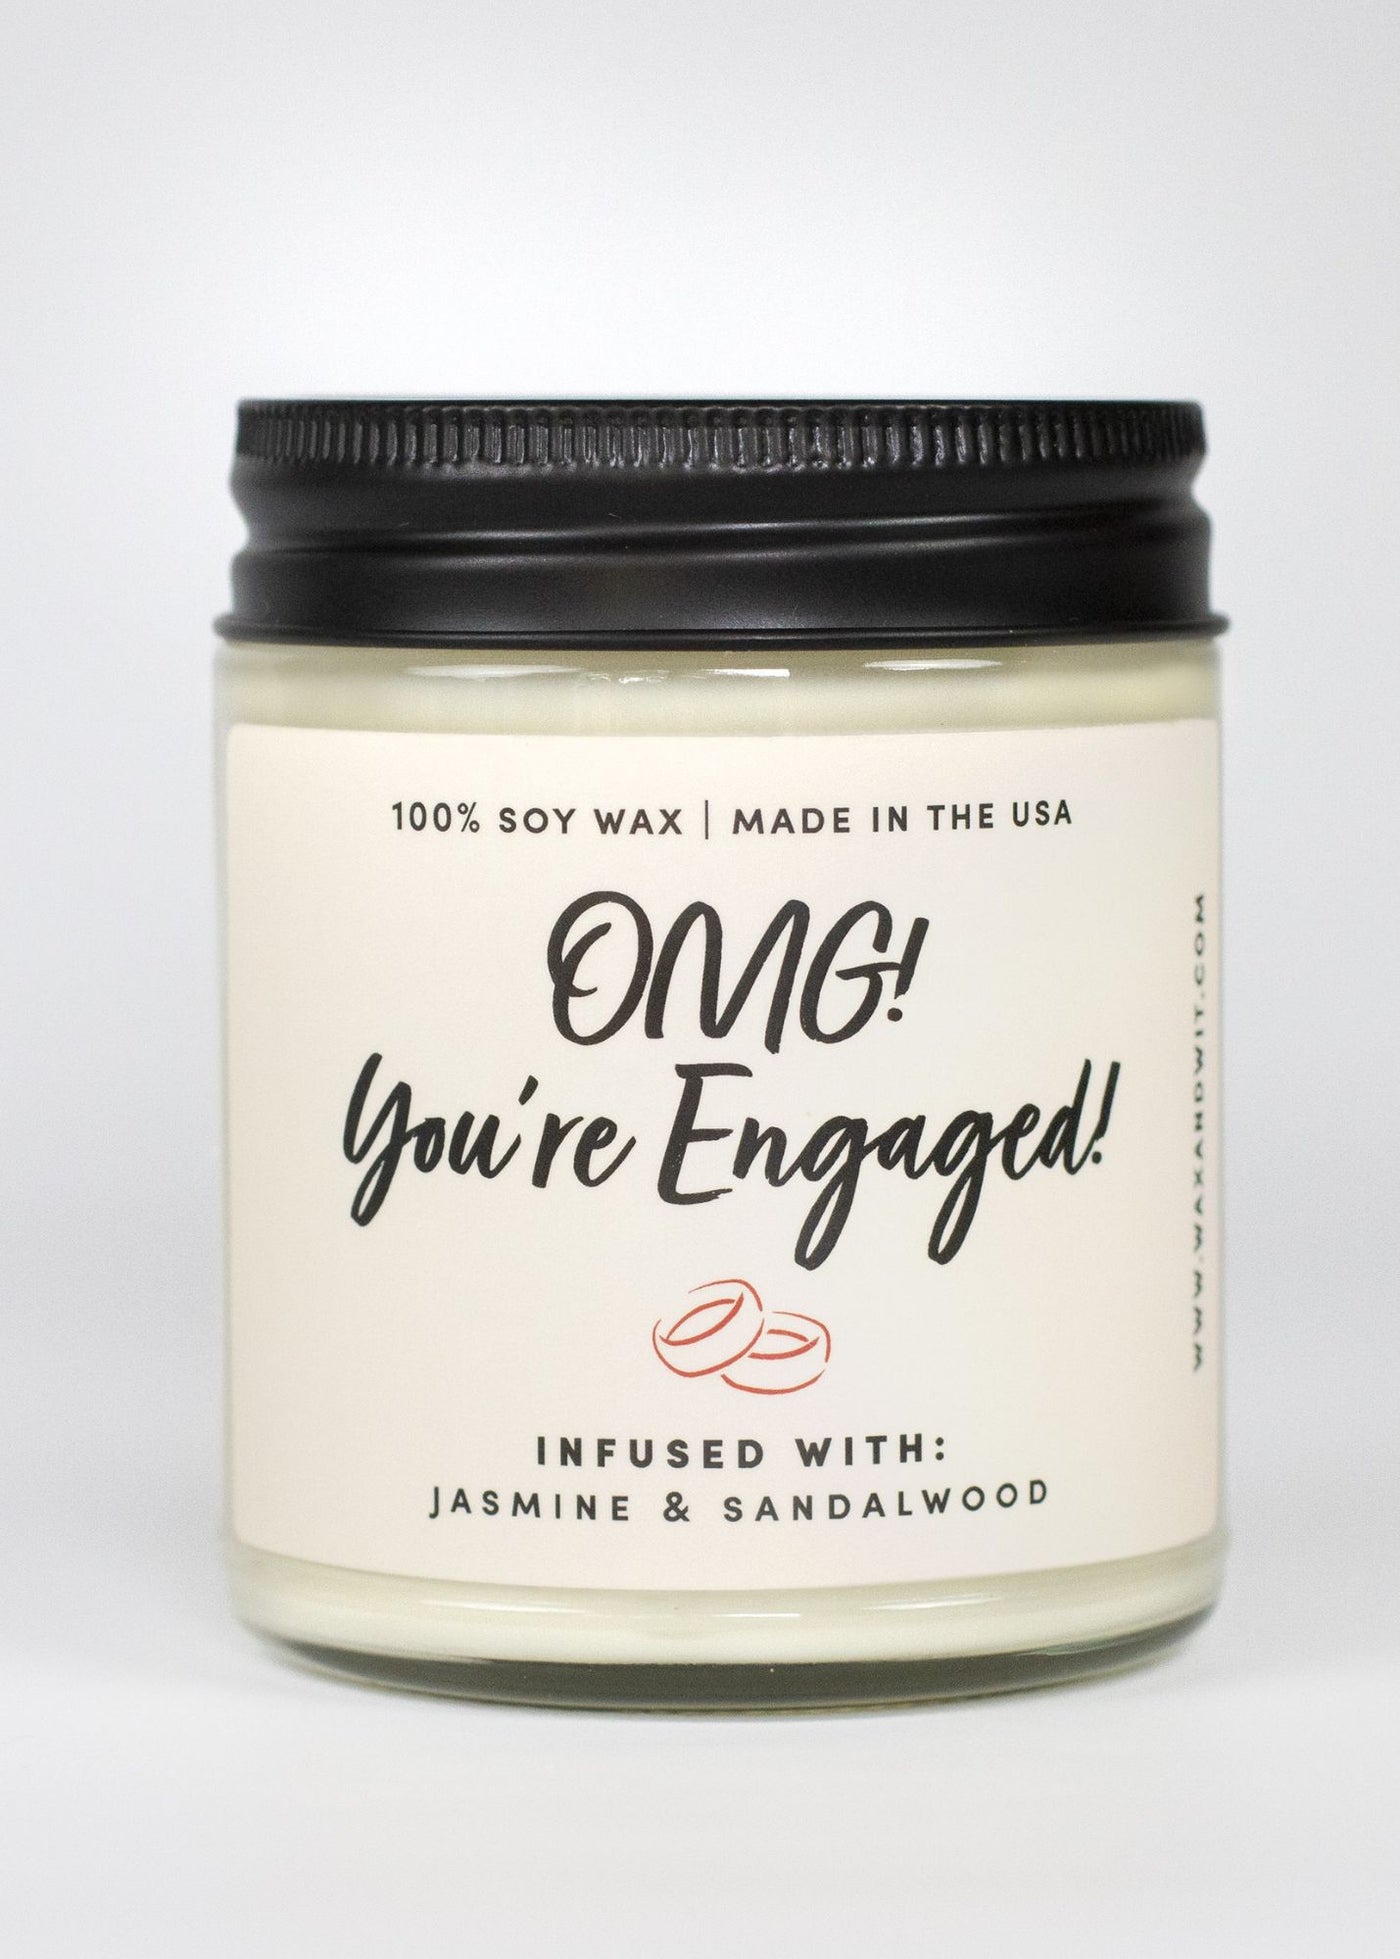 OMG! You're Engaged!